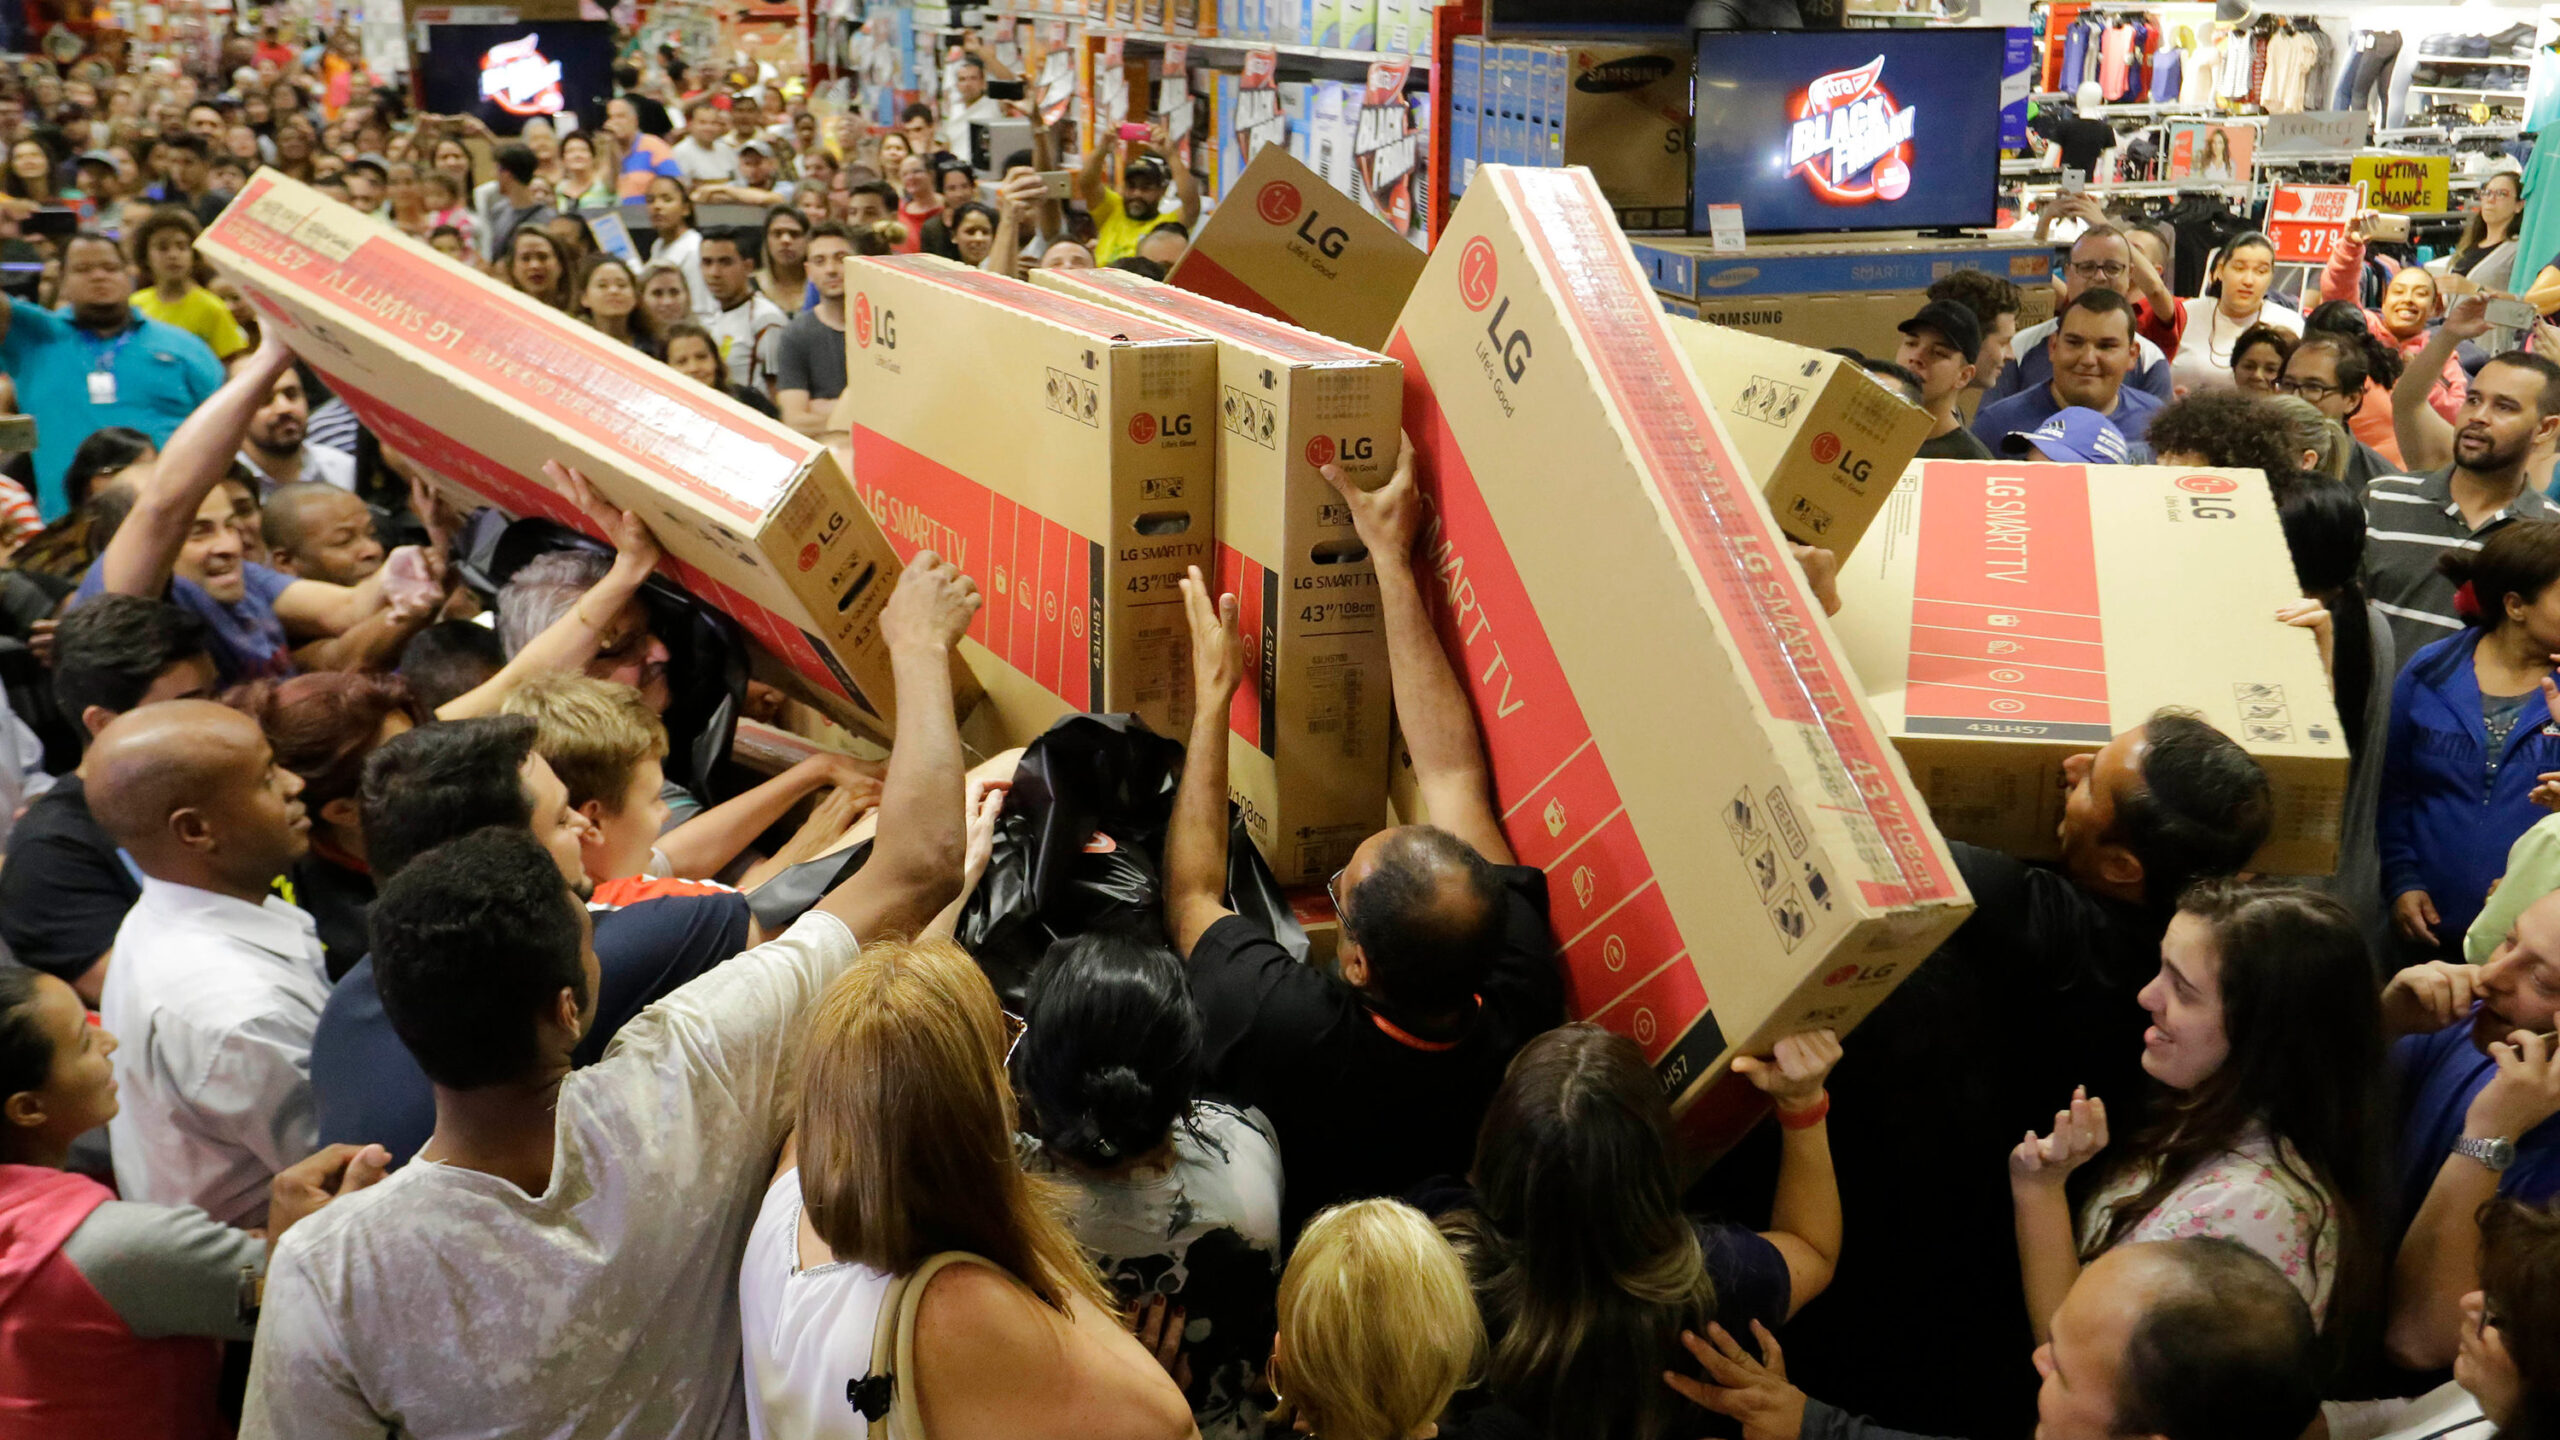 Shoppers fighting for LG tvs on black friday sale